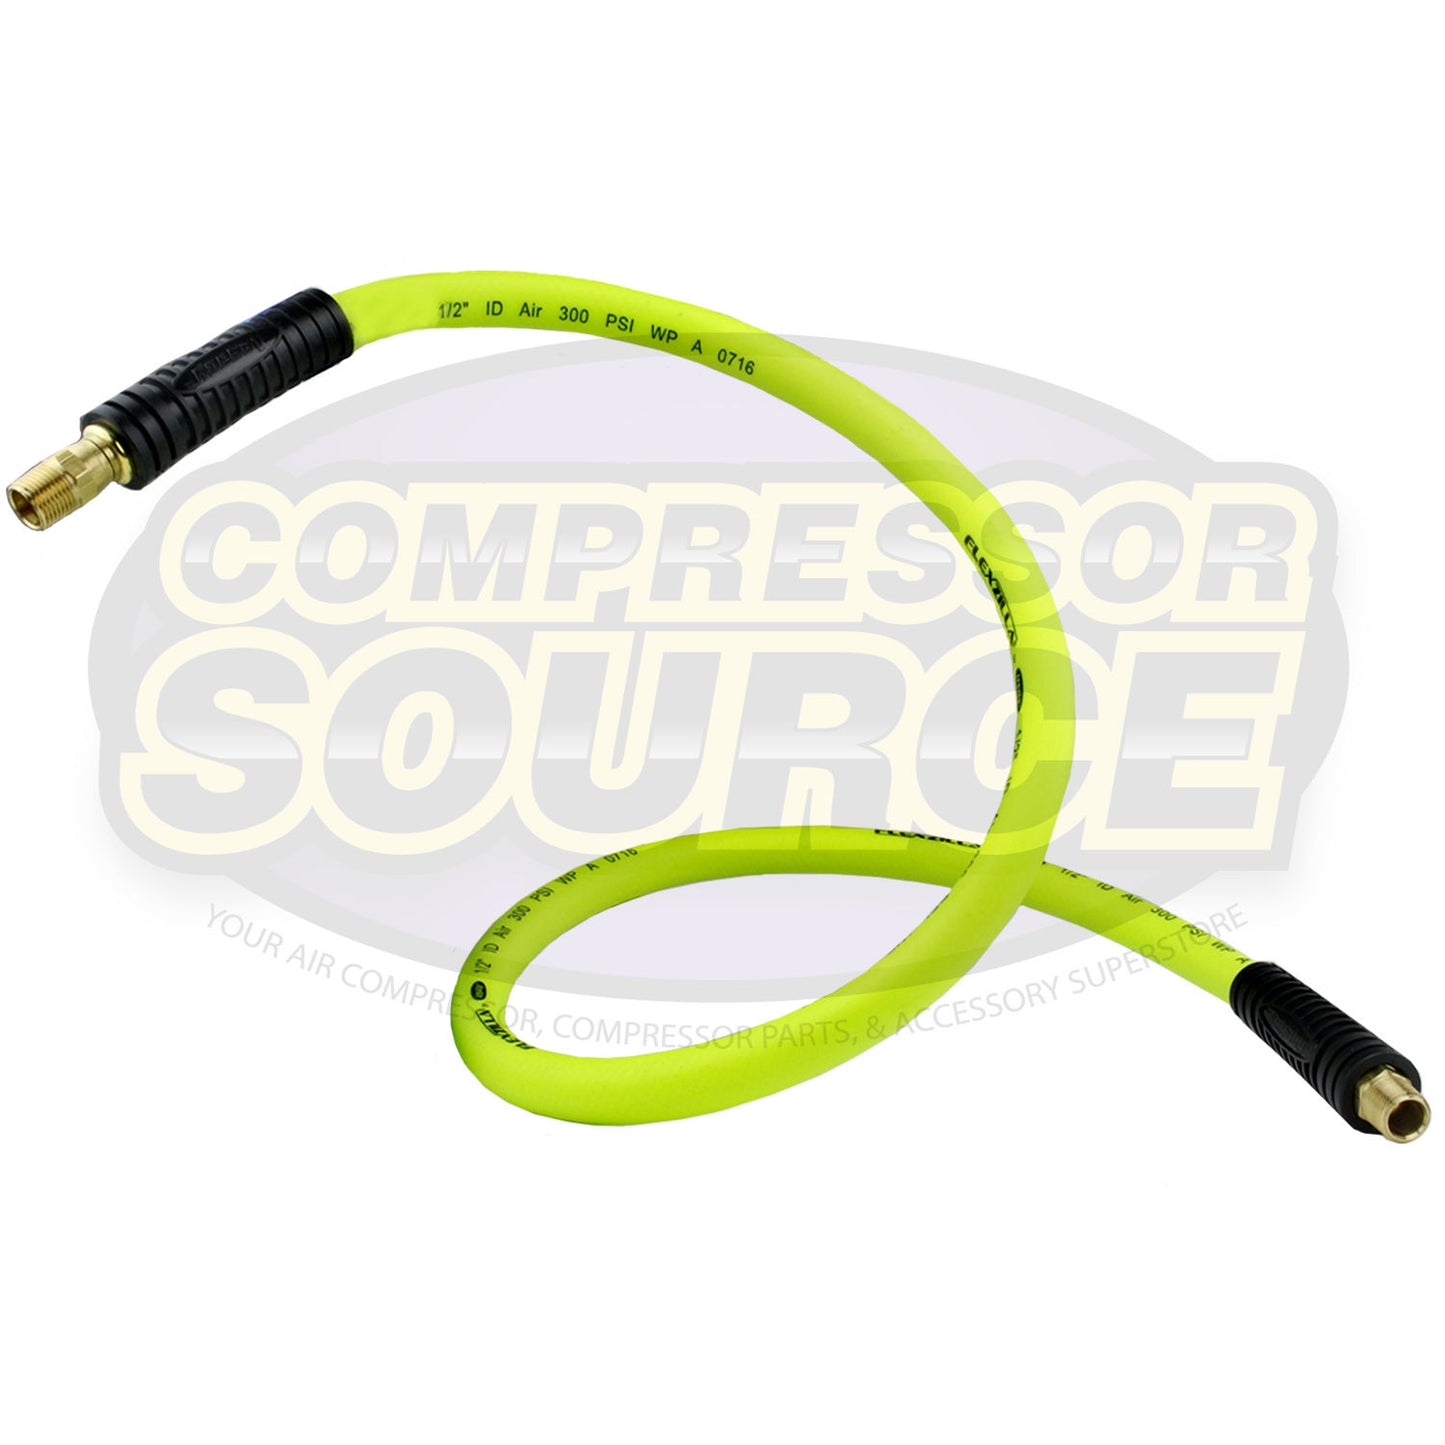 Flexzilla New 1/2" x 4' FT Air Hose Whip with 1/2" MNPT Swivel End HFZ1204YW4S